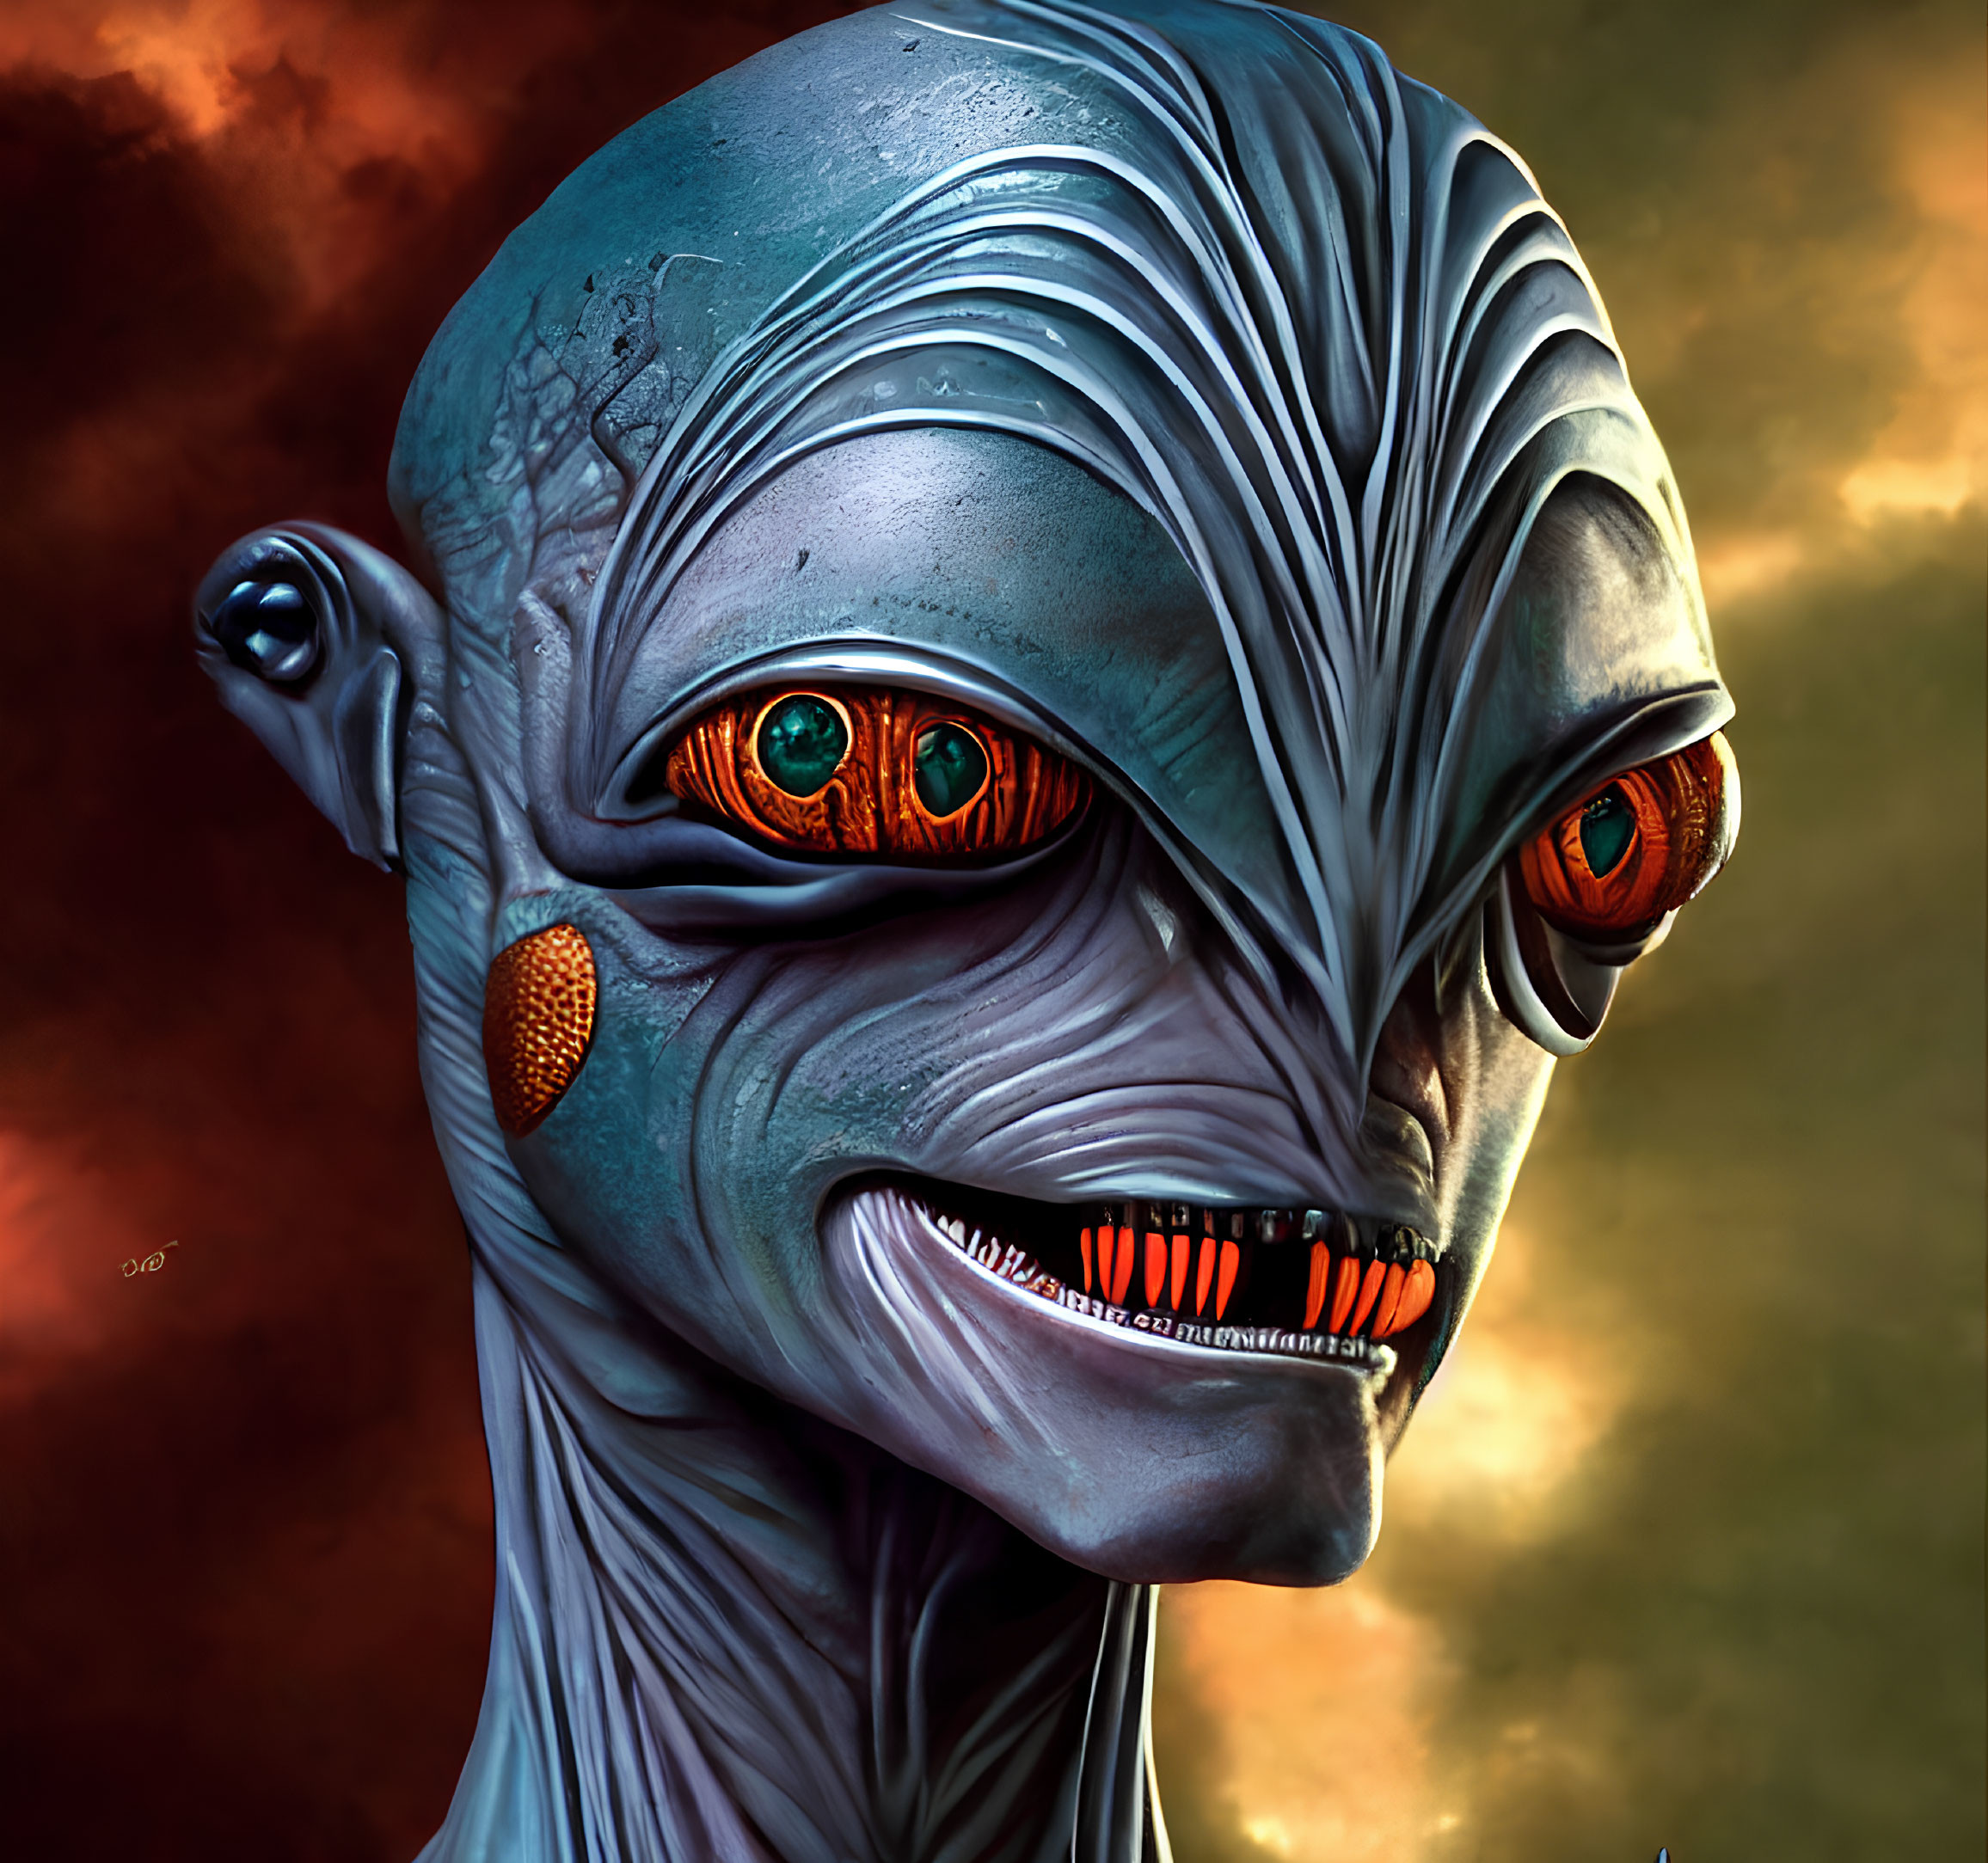 Alien creature with blue-gray skin and orange eyes on fiery background